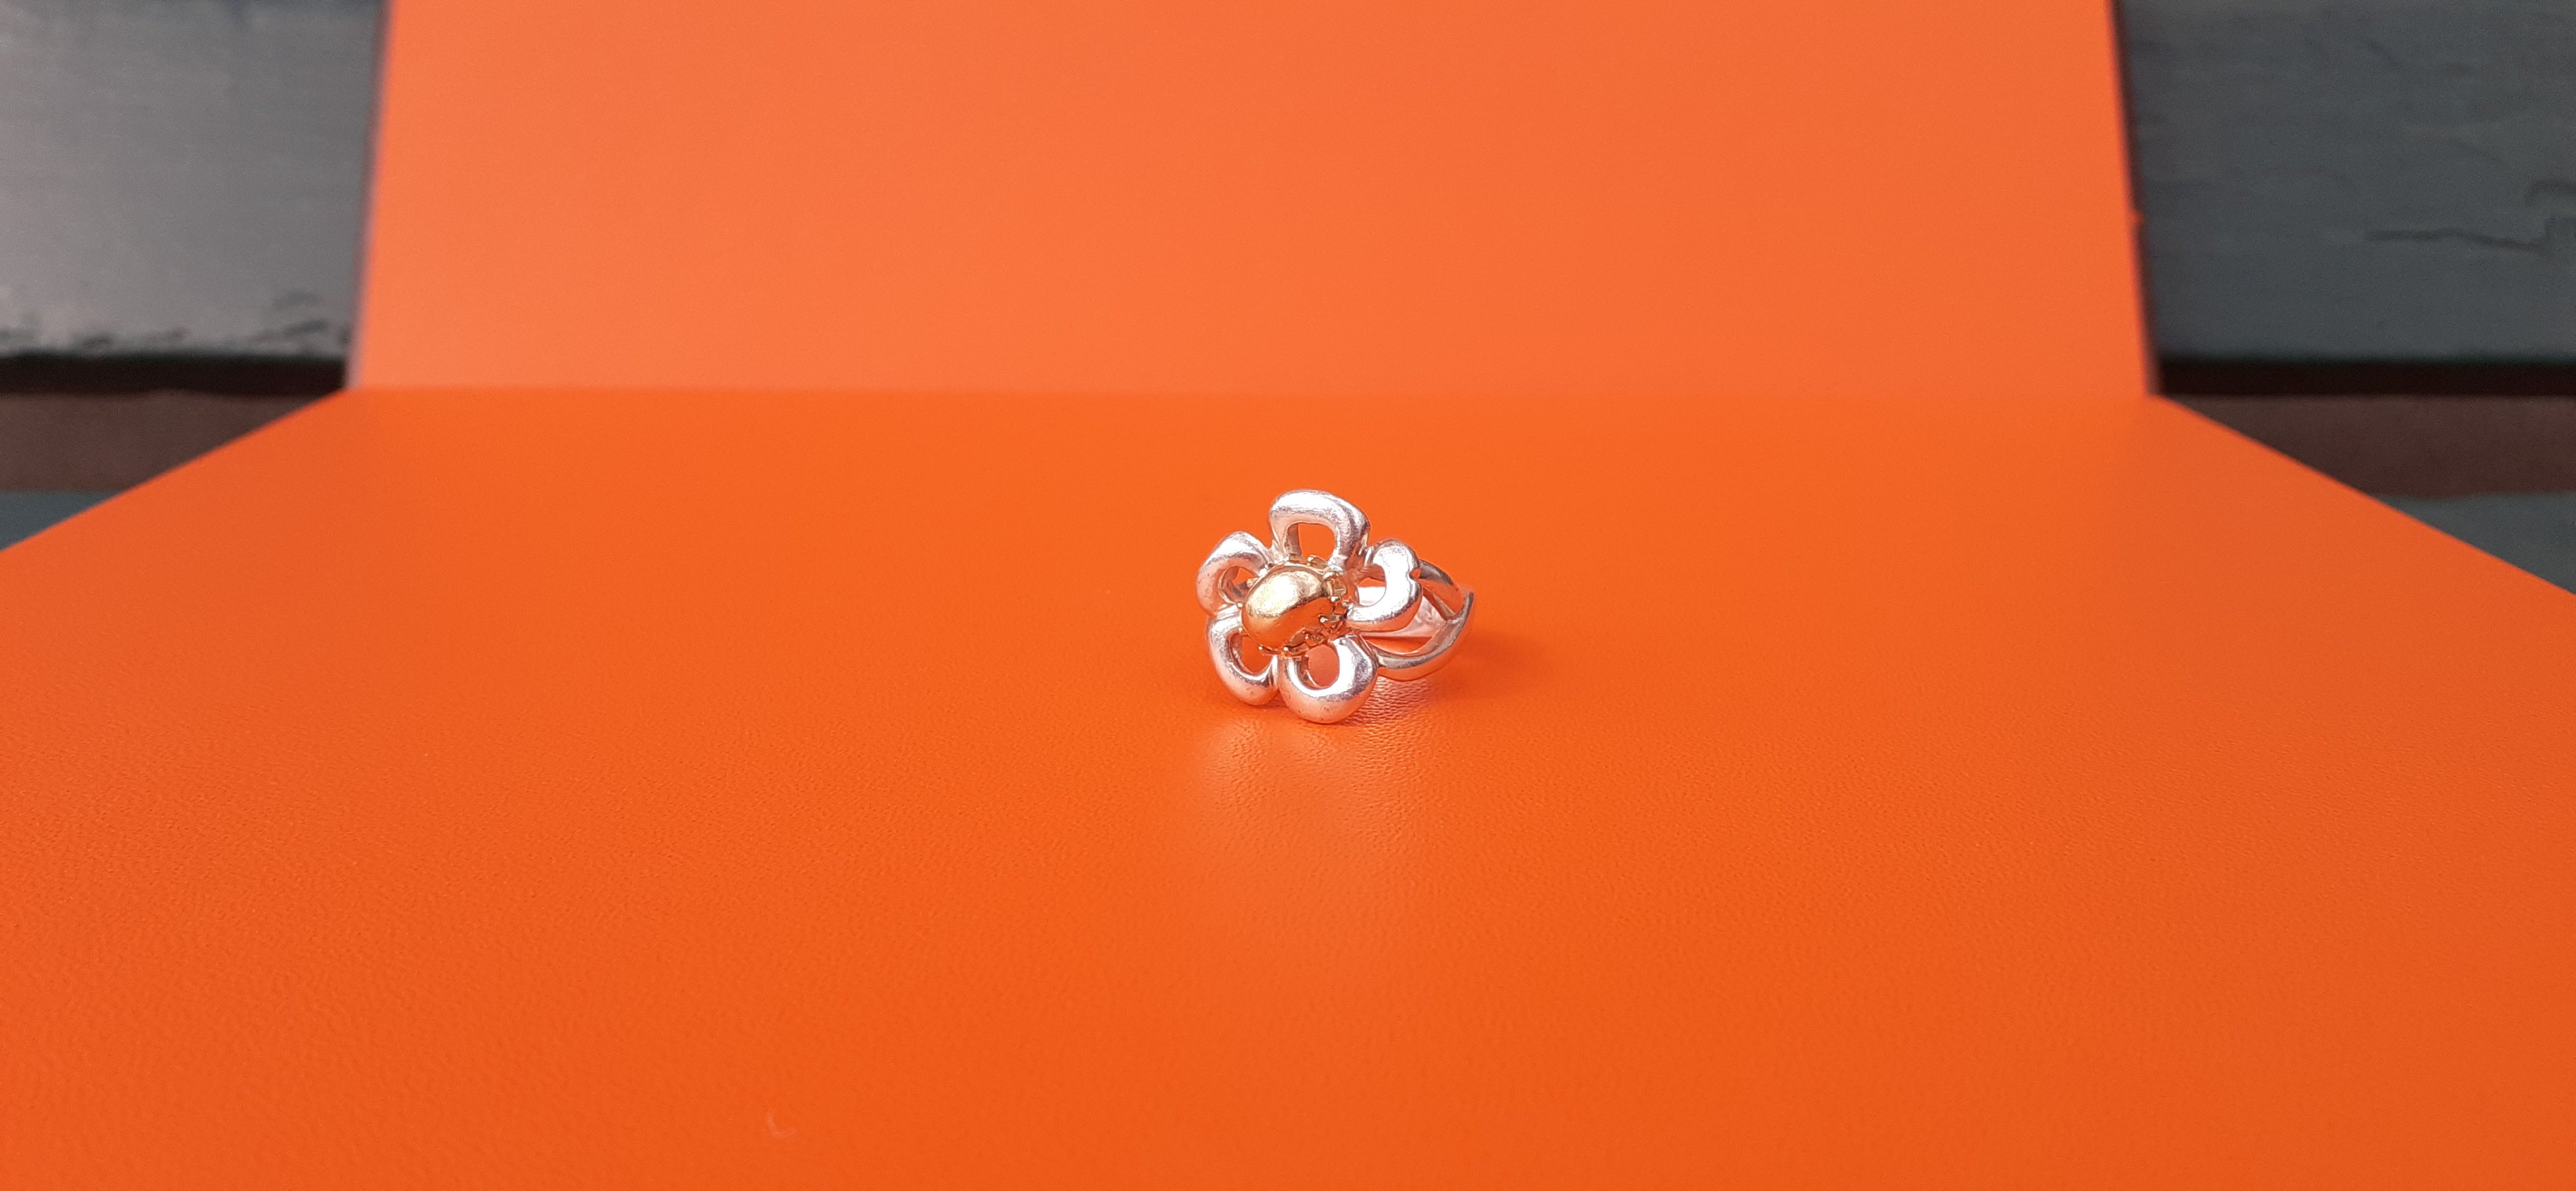 Lovely and Rare Authentic Hermès Ring

In shape of a flower with 5 petals

Made of Silver 925 and Yellow Gold in the middle

